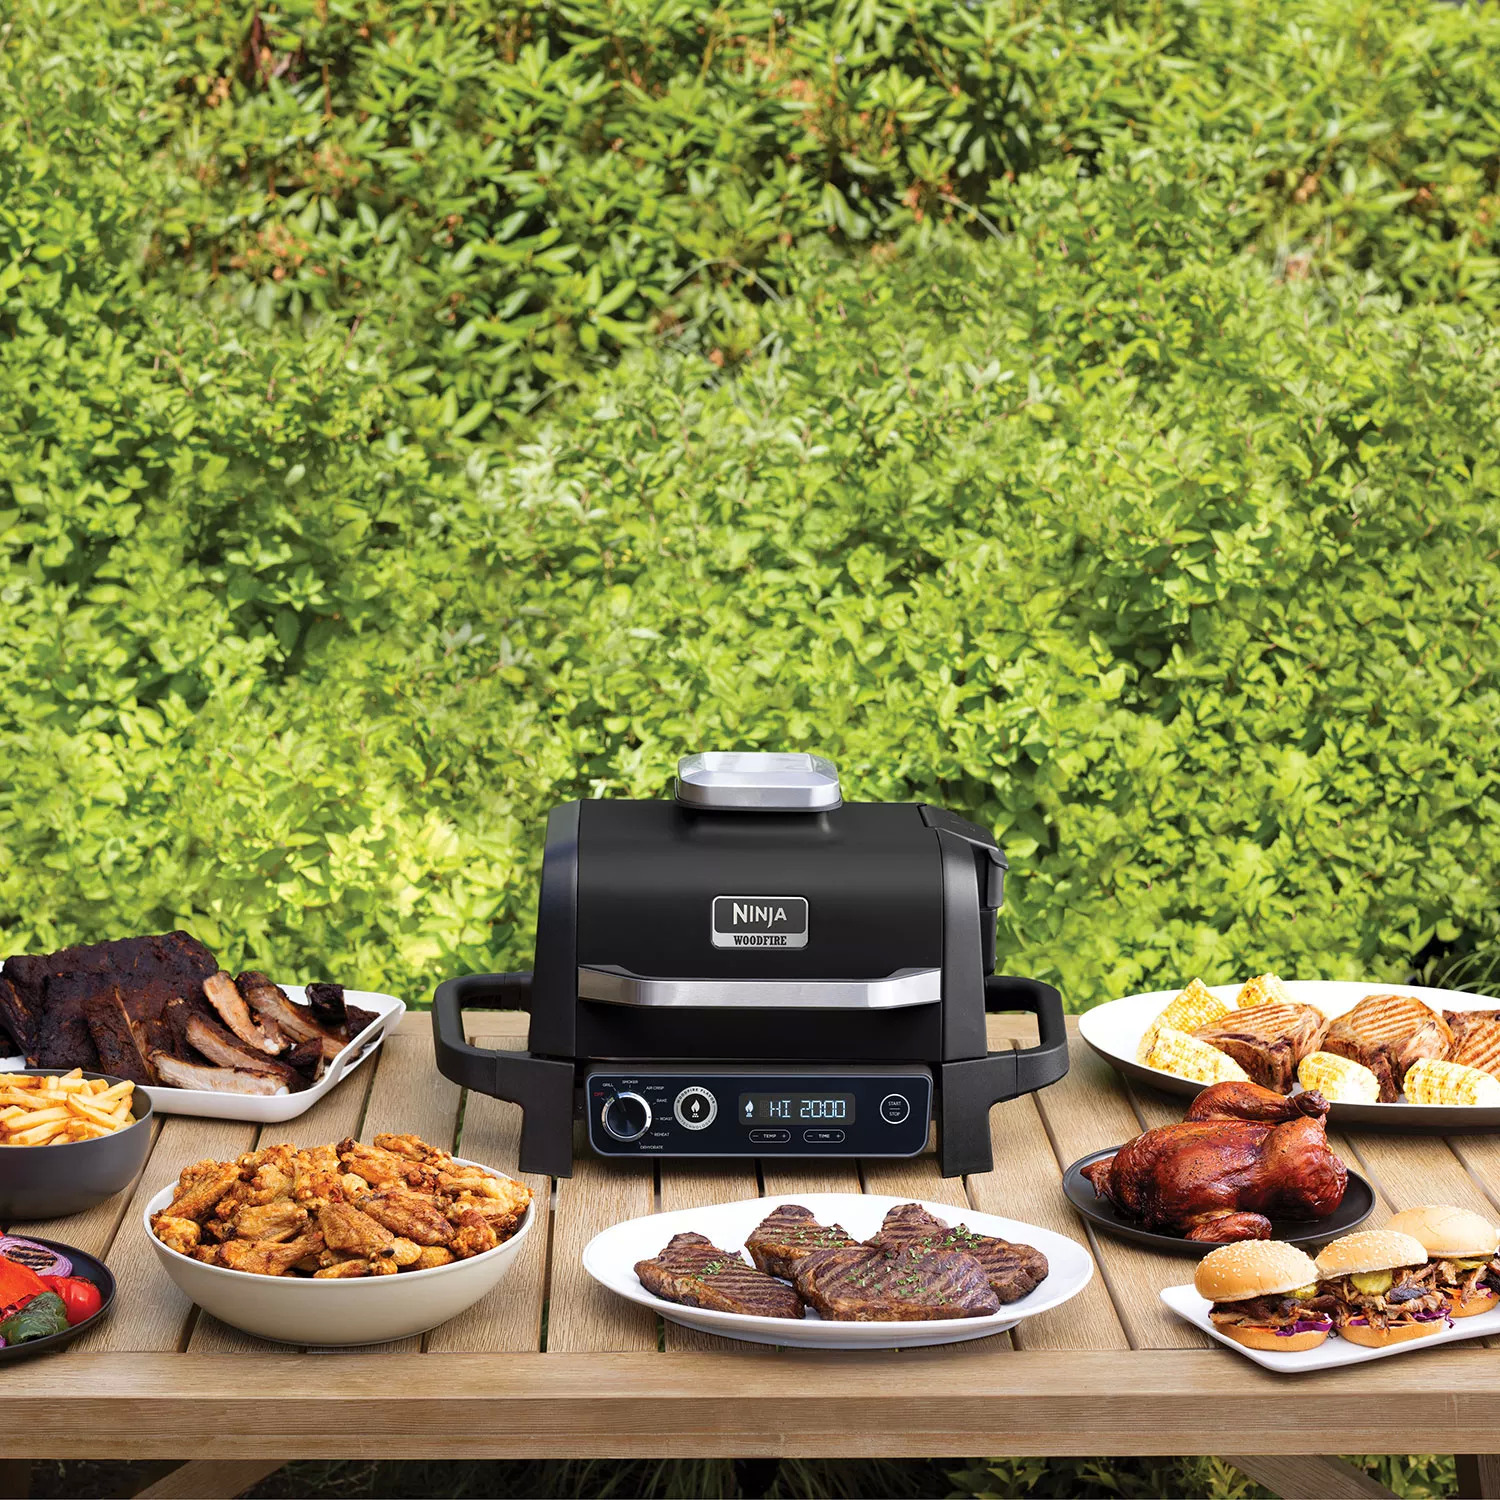 Ninja Woodfire Outdoor Grill & Smoker, OG705A, 7-in-1 Master Grill - $249.98 at Sam's Club